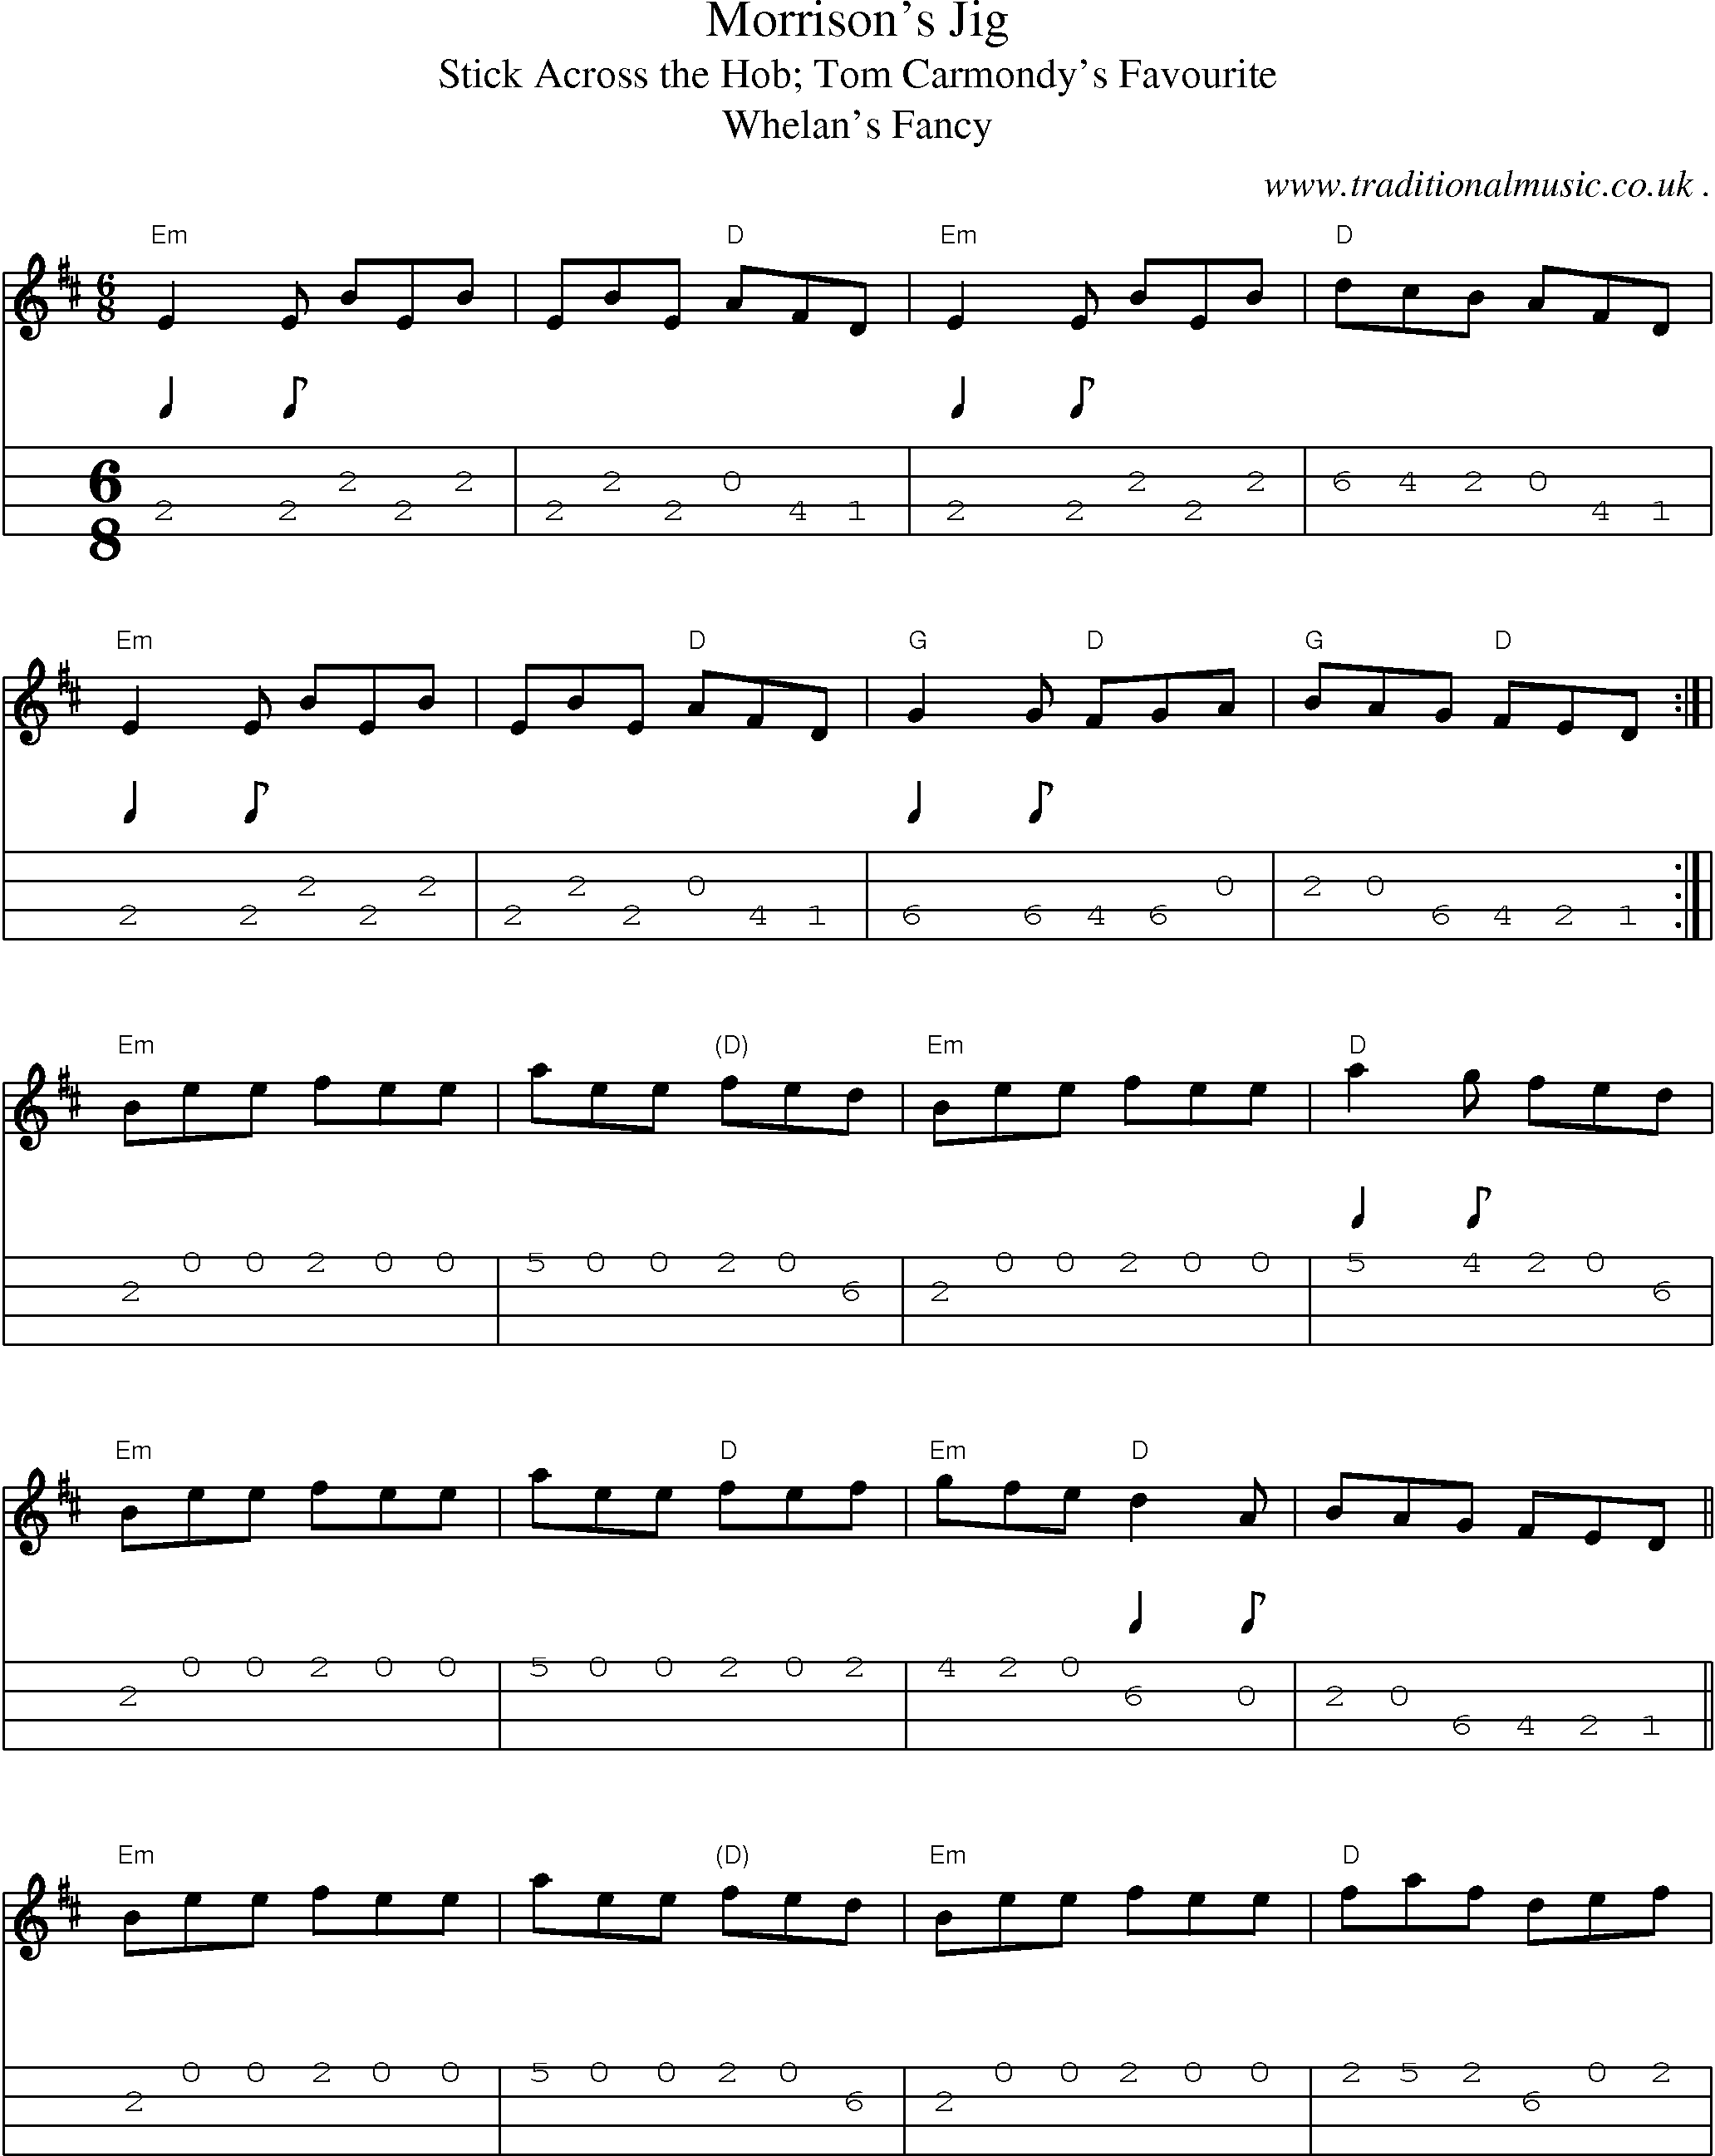 Music Score and Guitar Tabs for Morrisons Jig1